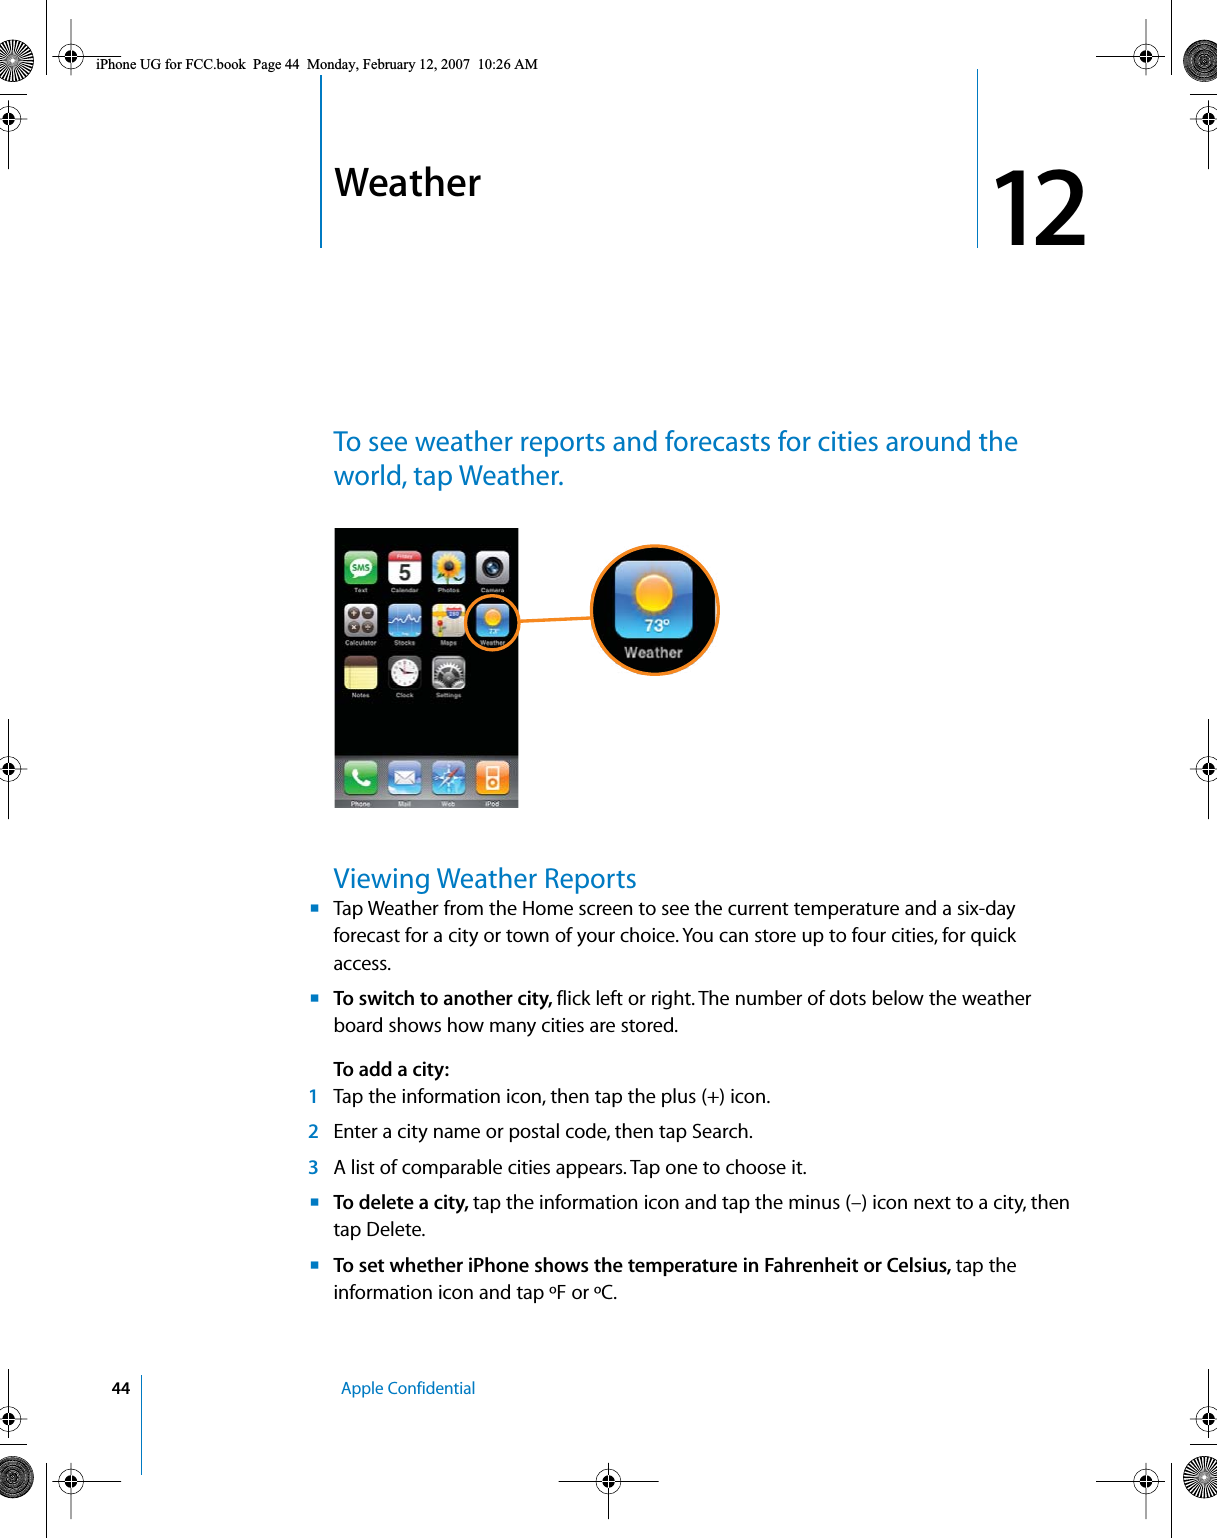 1244   Apple Confidential12 WeatherTo see weather reports and forecasts for cities around the world, tap Weather.Viewing Weather ReportsmTap Weather from the Home screen to see the current temperature and a six-day forecast for a city or town of your choice. You can store up to four cities, for quick access.mTo switch to another city, flick left or right. The number of dots below the weather board shows how many cities are stored.To add a city:1Tap the information icon, then tap the plus (+) icon.2Enter a city name or postal code, then tap Search. 3A list of comparable cities appears. Tap one to choose it.mTo delete a city, tap the information icon and tap the minus (–) icon next to a city, then tap Delete.mTo set whether iPhone shows the temperature in Fahrenheit or Celsius, tap the information icon and tap ºF or ºC.iPhone UG for FCC.book  Page 44  Monday, February 12, 2007  10:26 AM